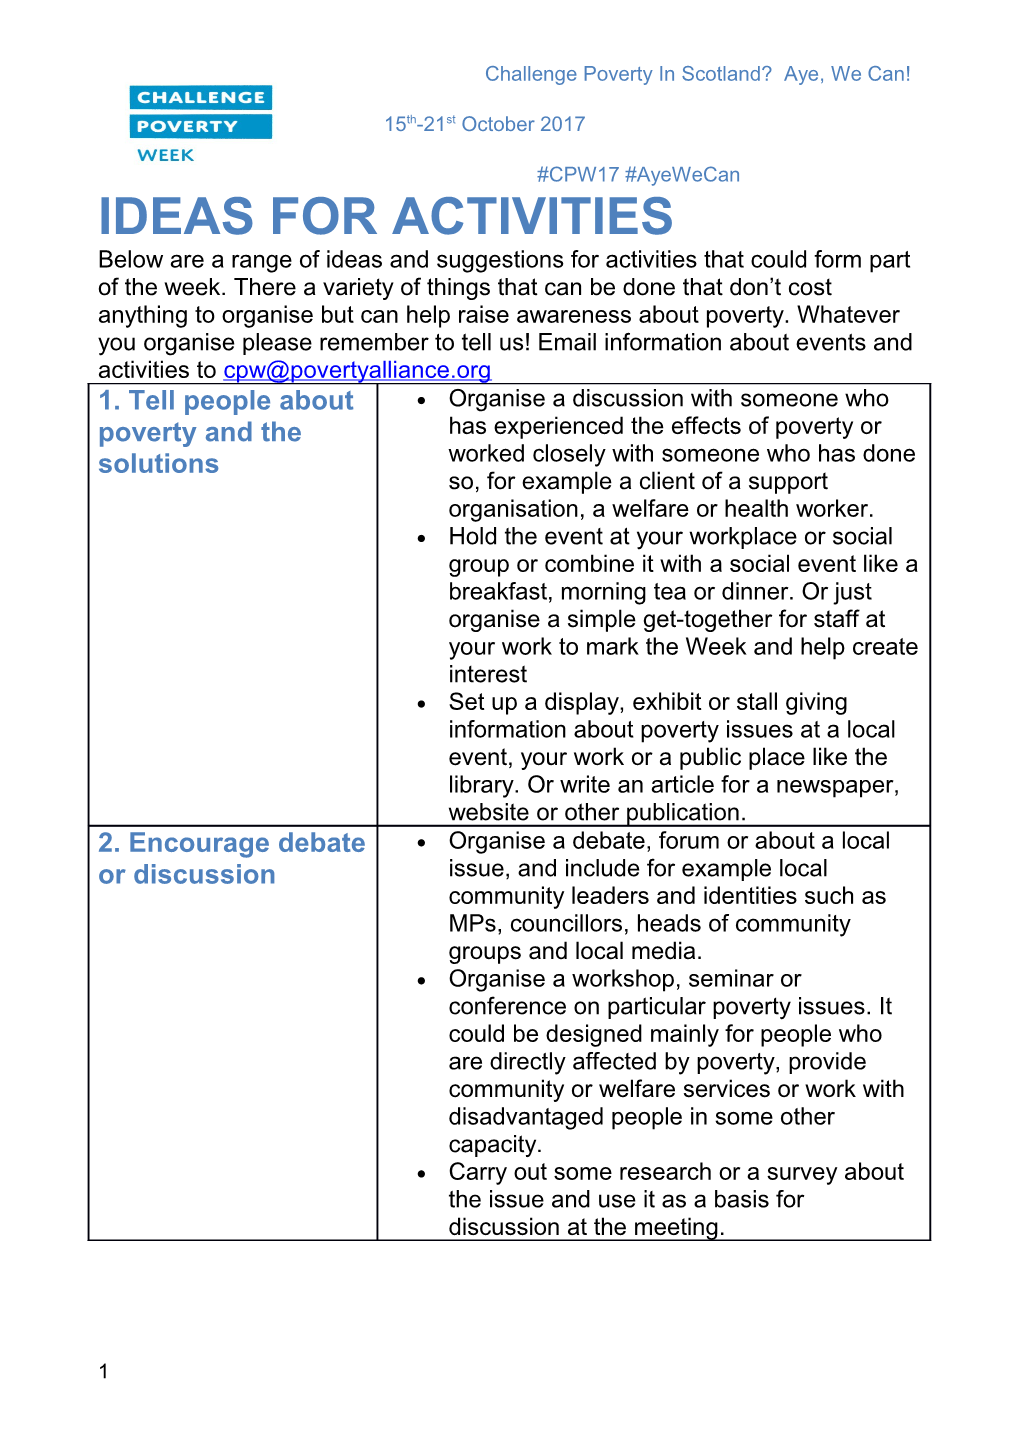 Ideas for Activities